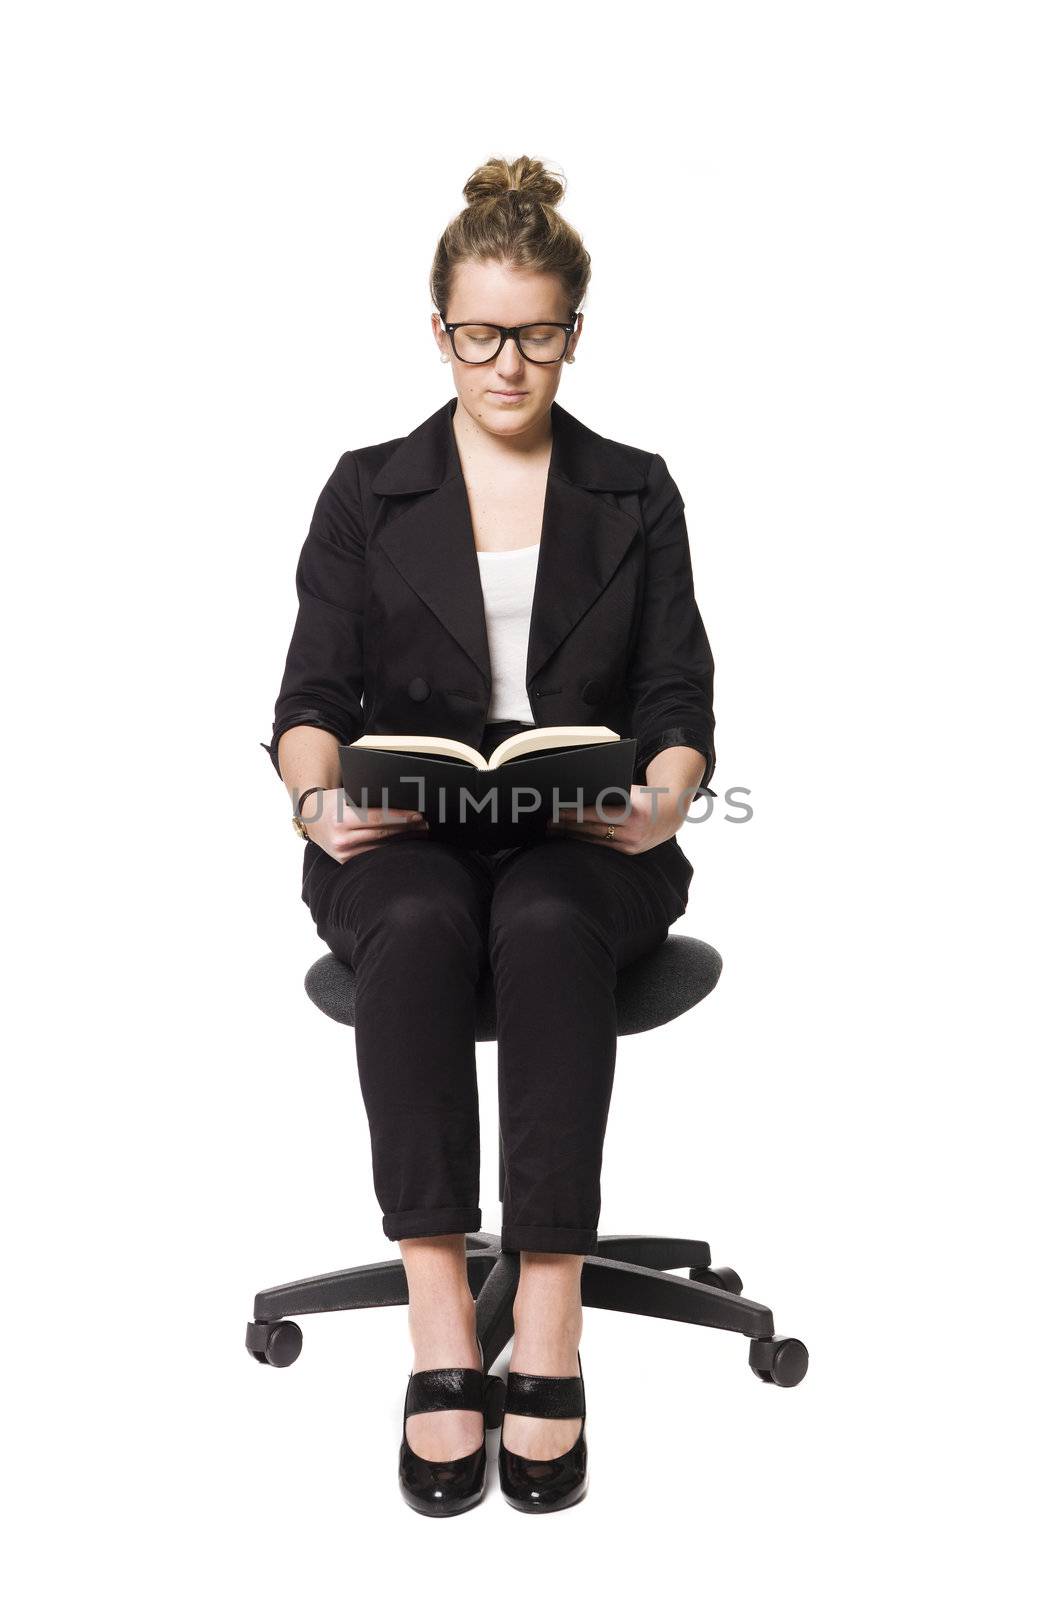 Buisnesswoman sitting on a chair with a book by gemenacom